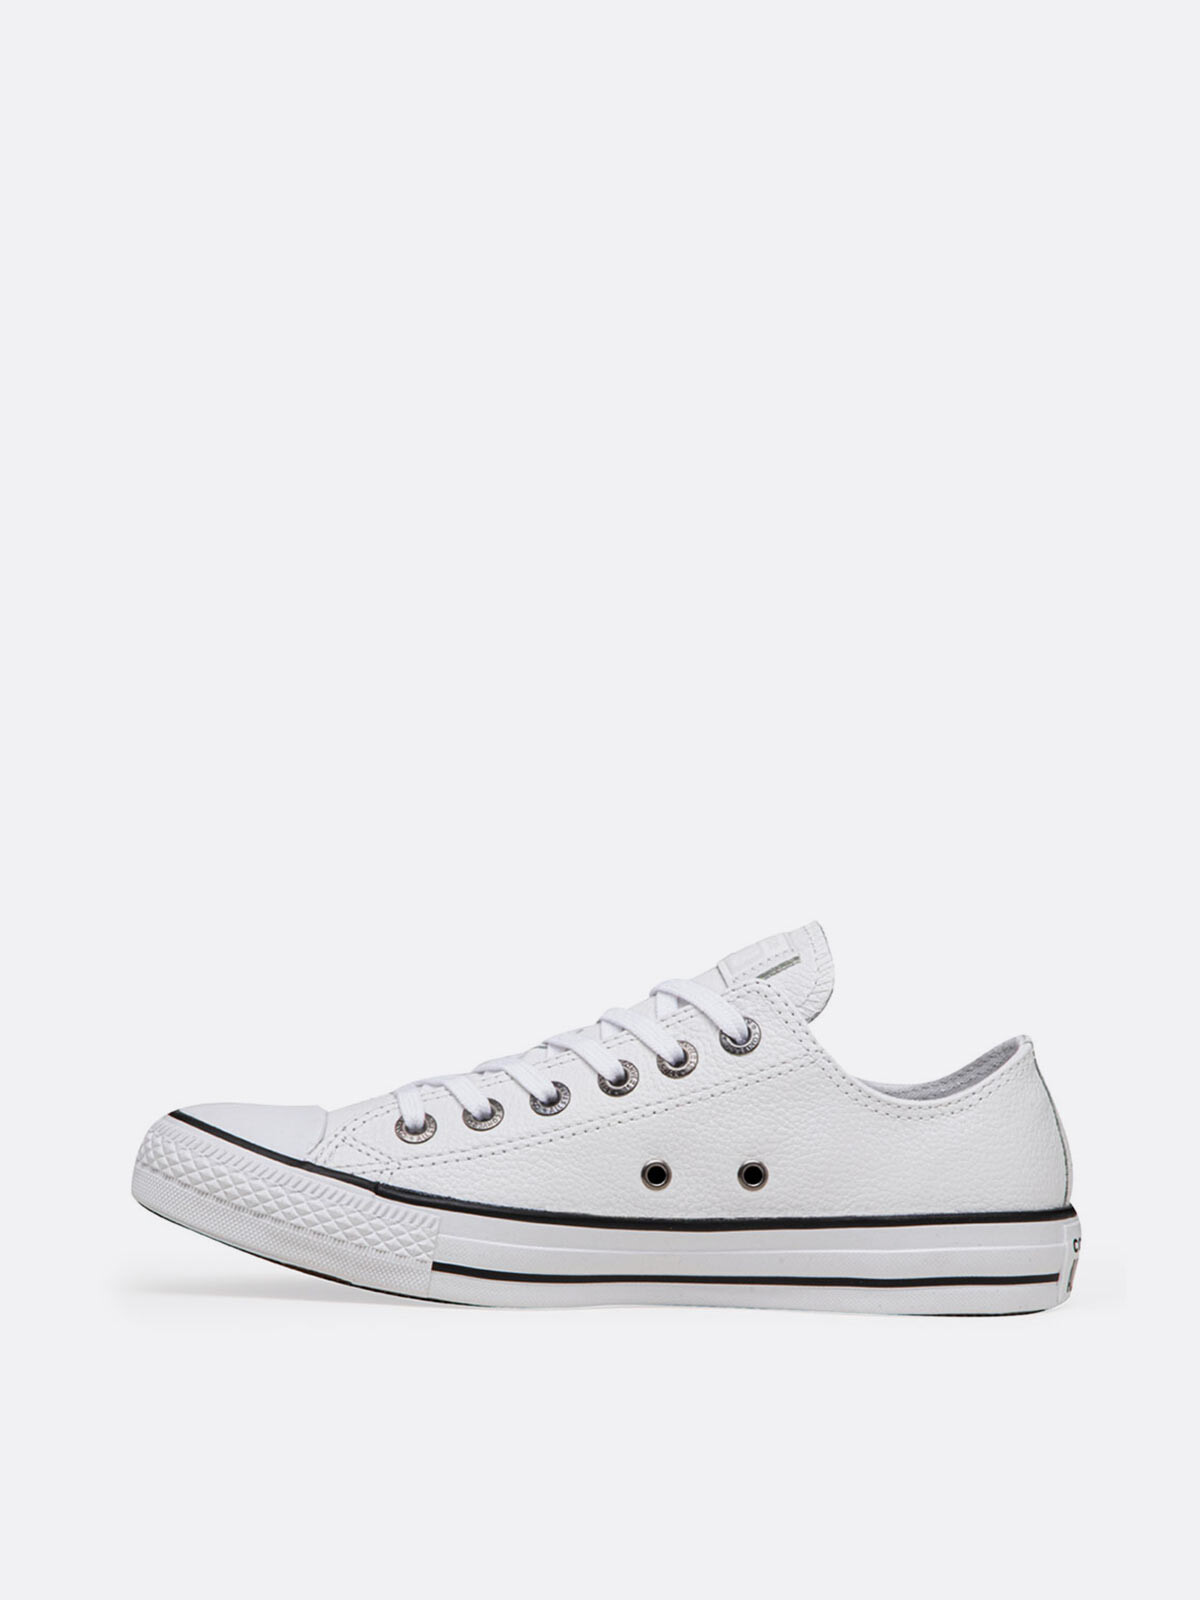 Chuck taylor as ox leather opt BLANCO